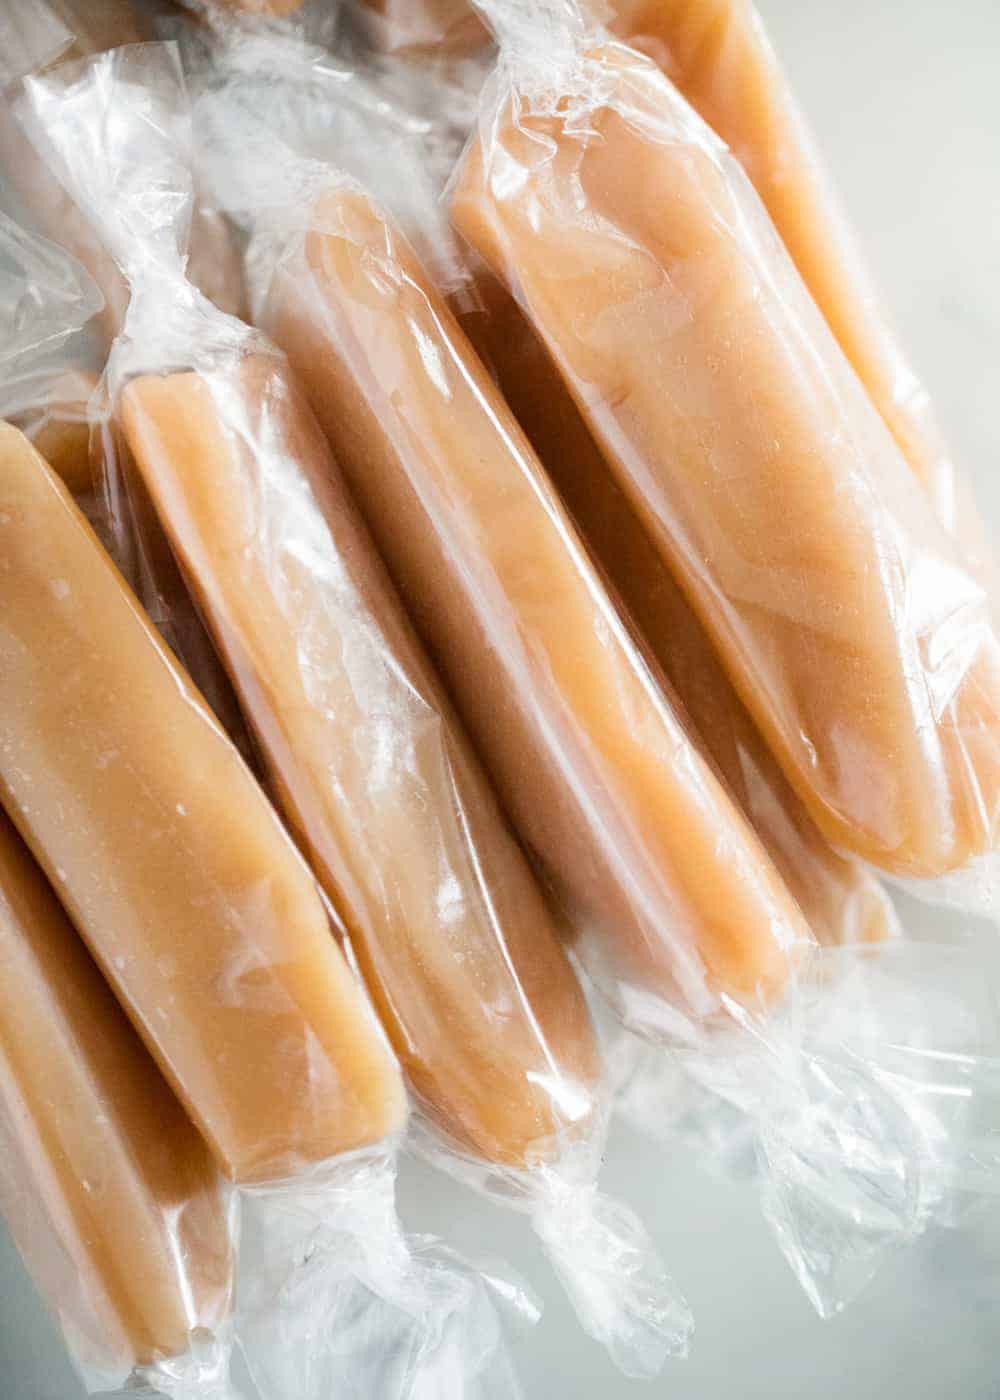 Caramel candies wrapped in cellophane.